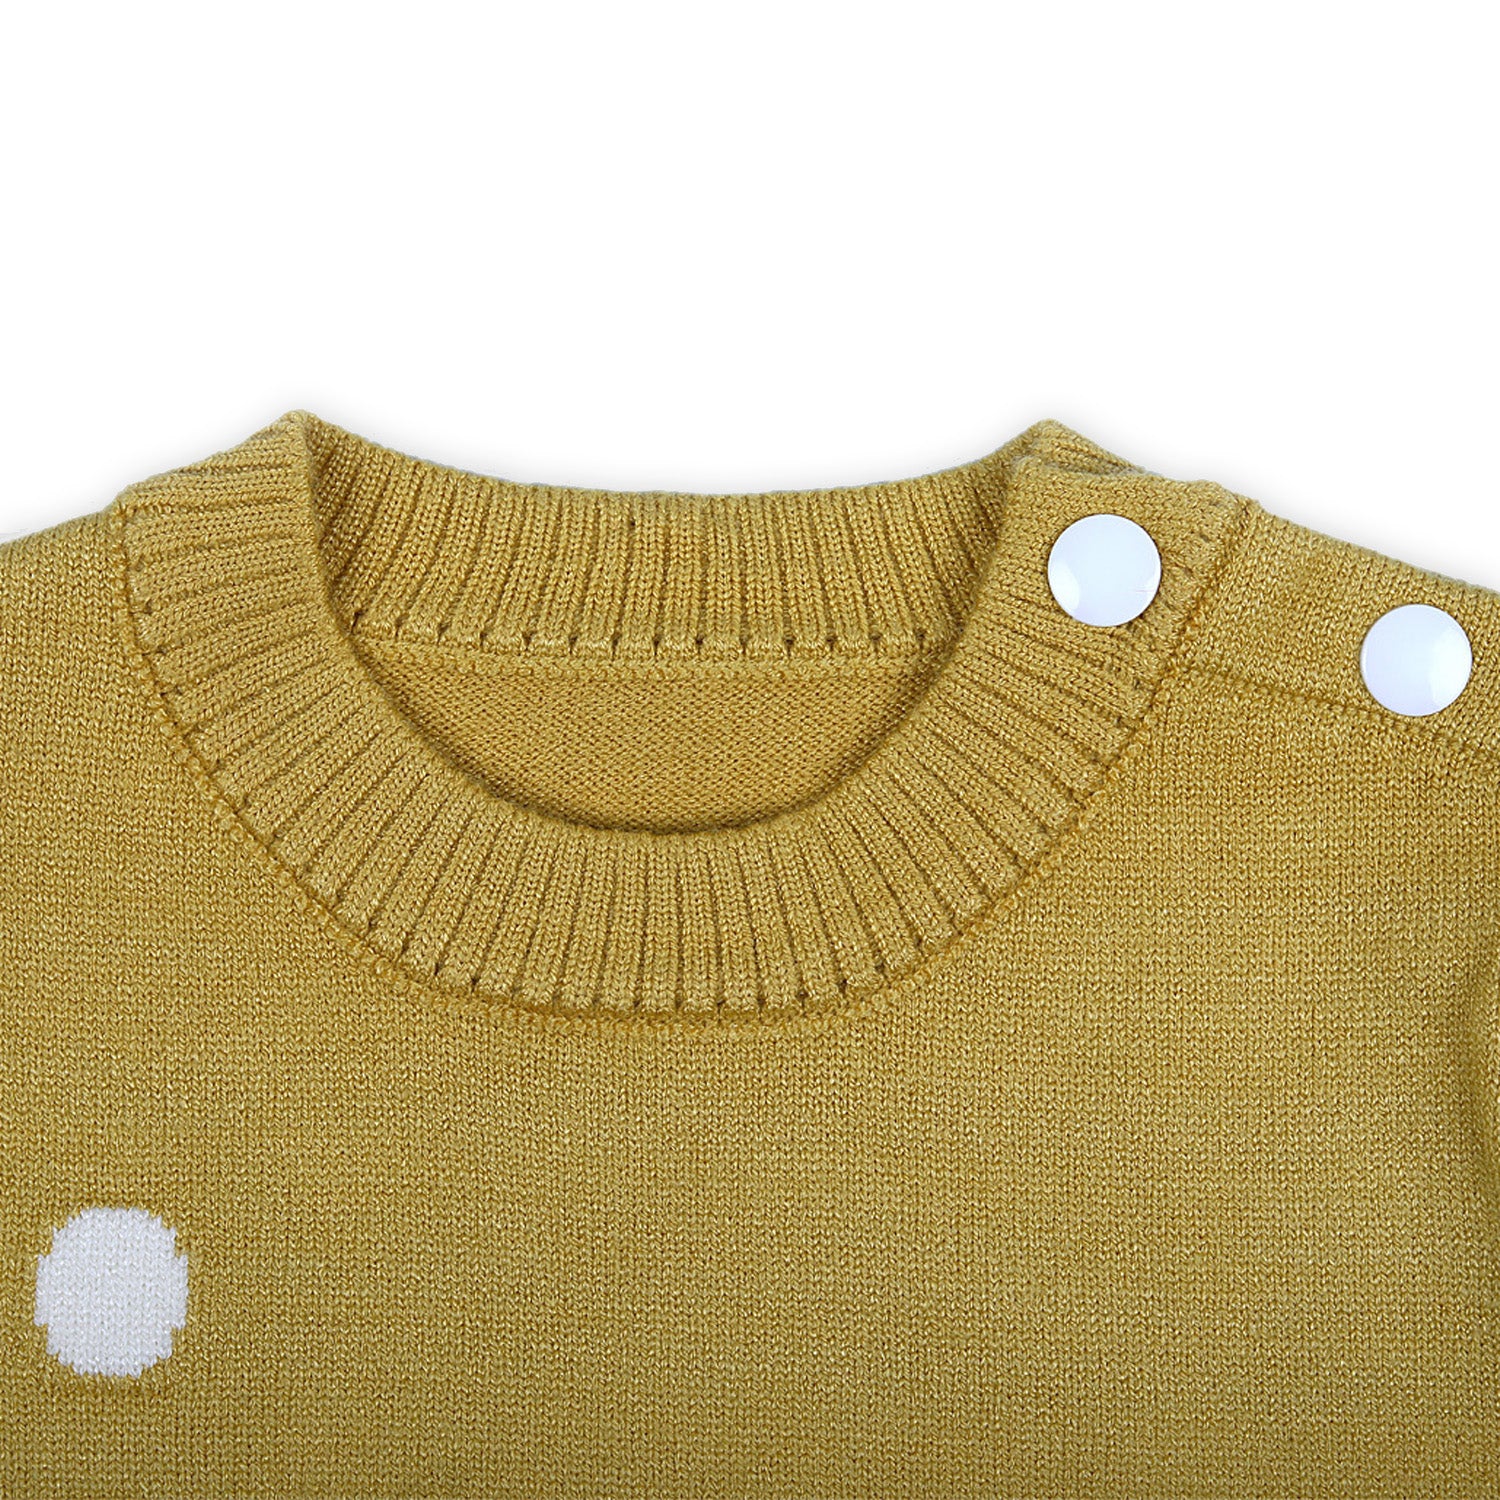 Elephant With 3D Ear Premium Full Sleeves Knitted Sweater - Mustard